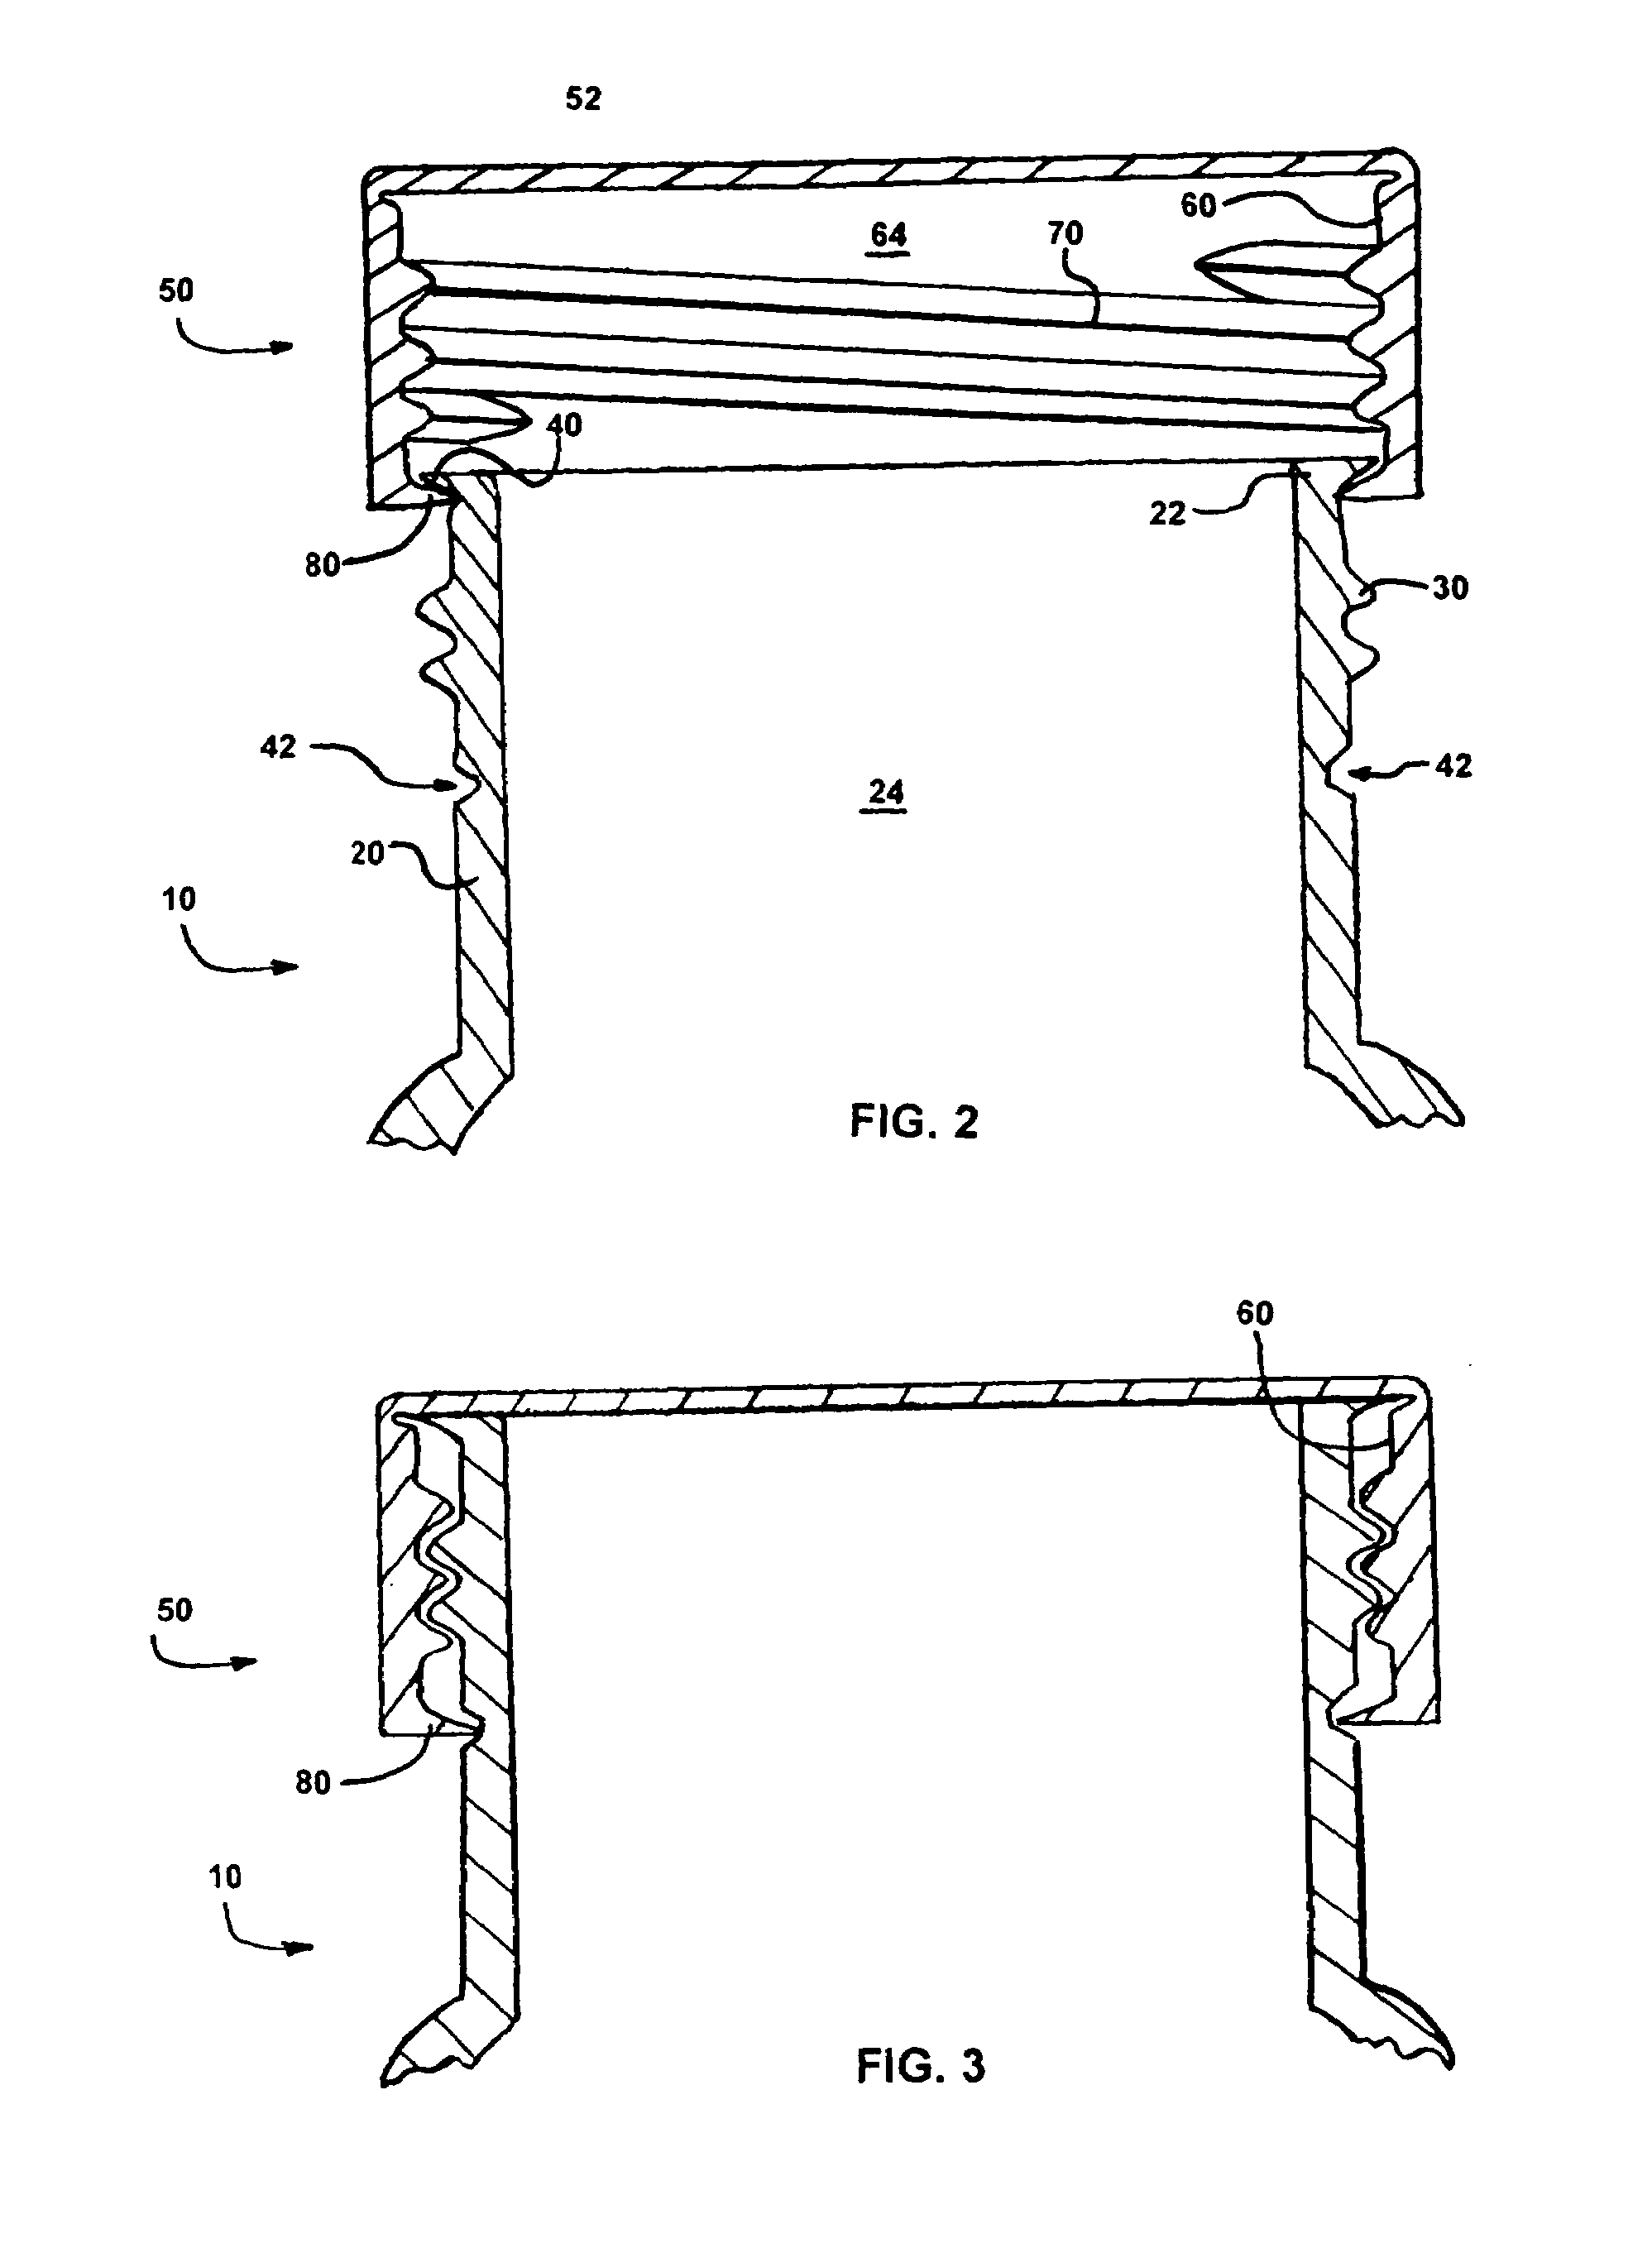 Method of connecting a top to a container